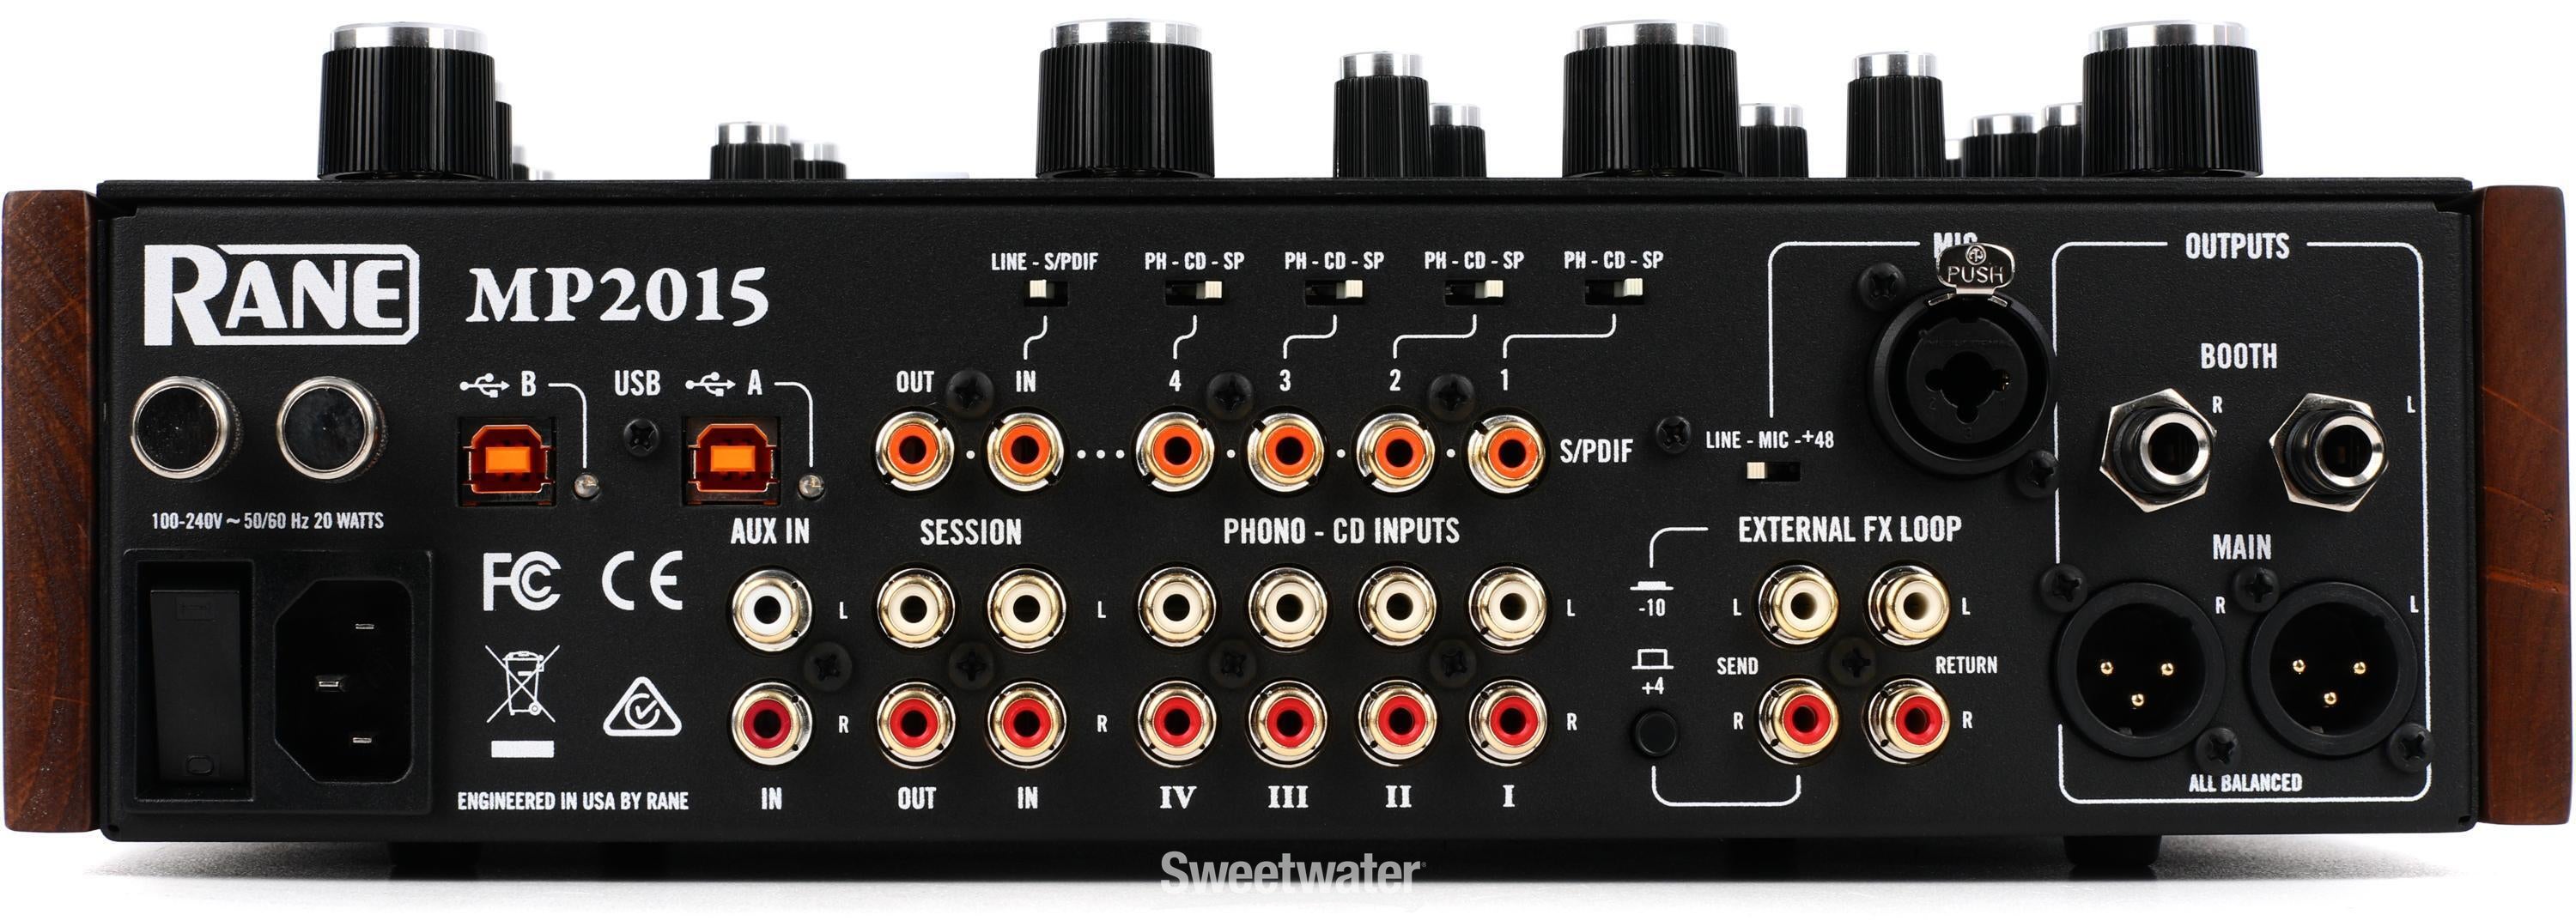 Rane MP2015 4-channel Rotary Mixer | Sweetwater